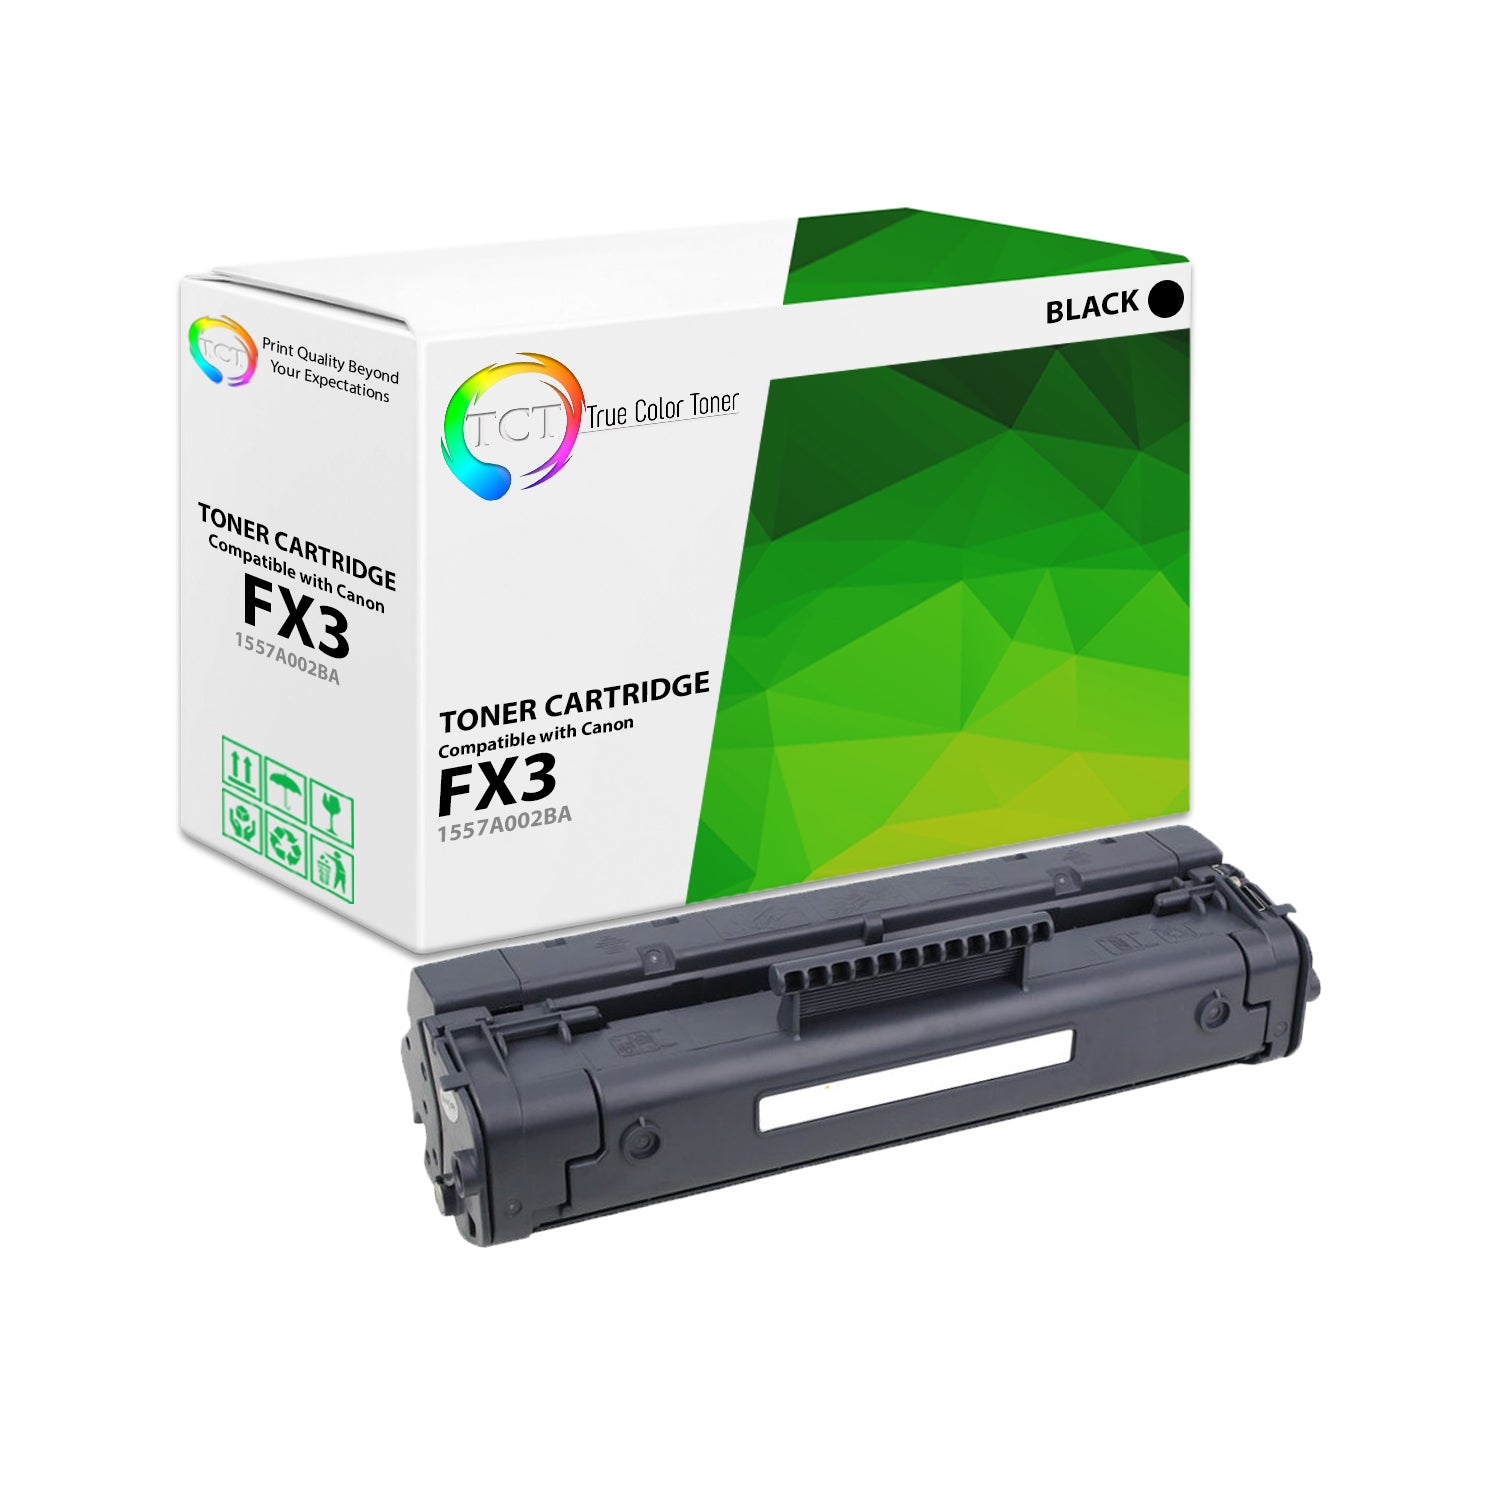 TCT Compatible Toner Cartridge Replacement for the Canon FX3 Series - 1 Pack Black